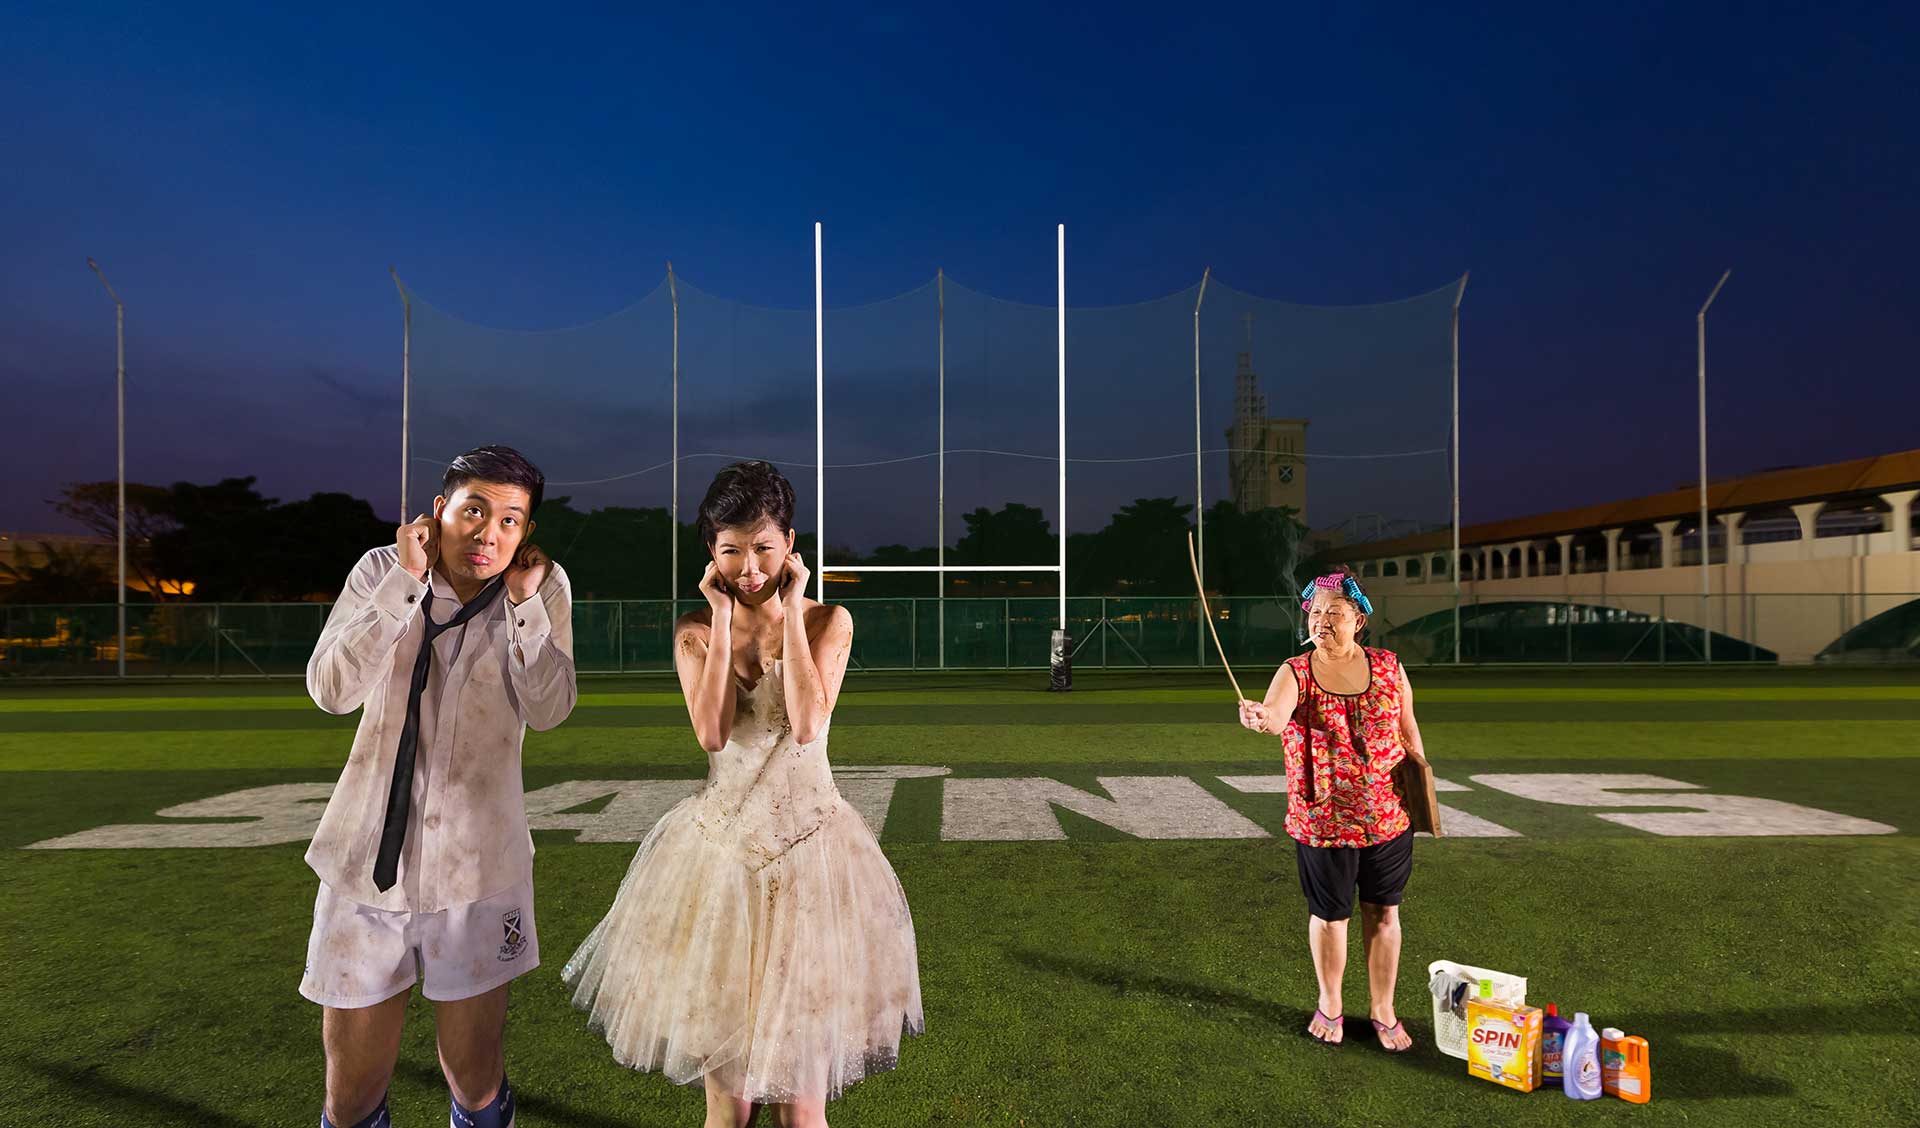 A couple in a regretful pose during a creative photoshoot on a football field.